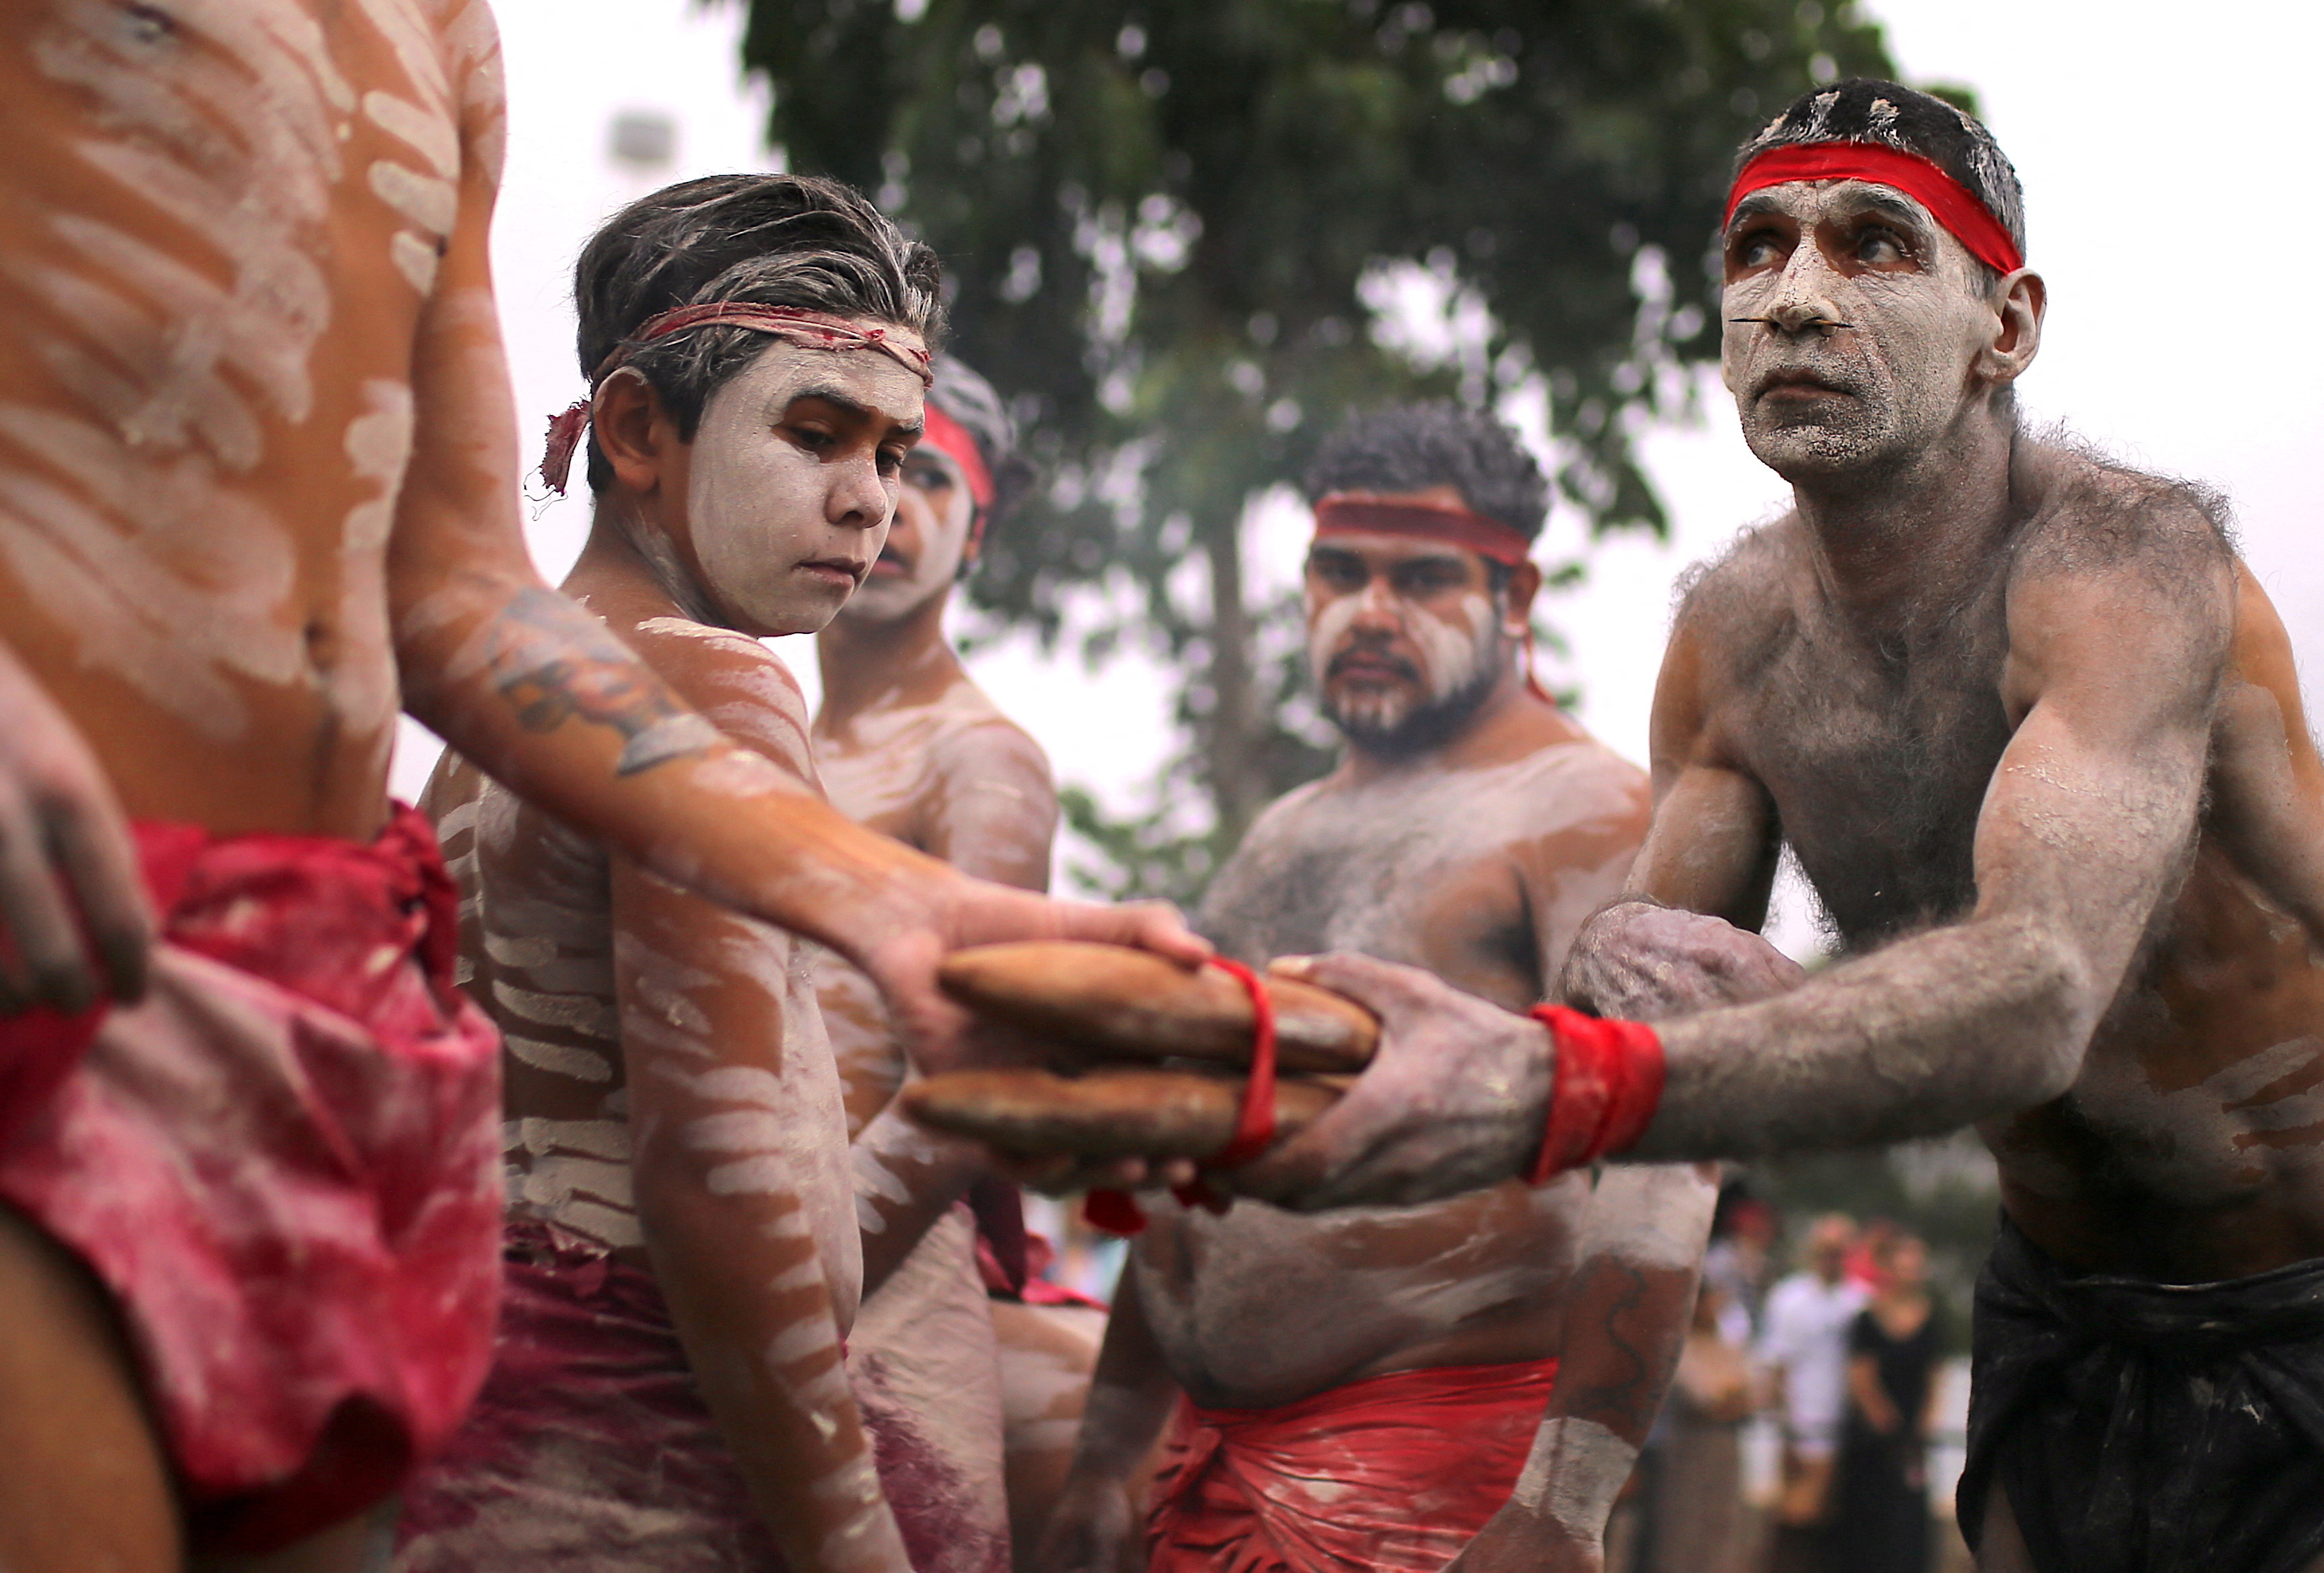 Members of Koomurri Aboriginal Dance Troupe participate in a traditional Australian Aboriginal smoking ceremony as part of celebrations for Australia Day, which marks the arrival of Britain's First Fleet in 1788, in central Sydney